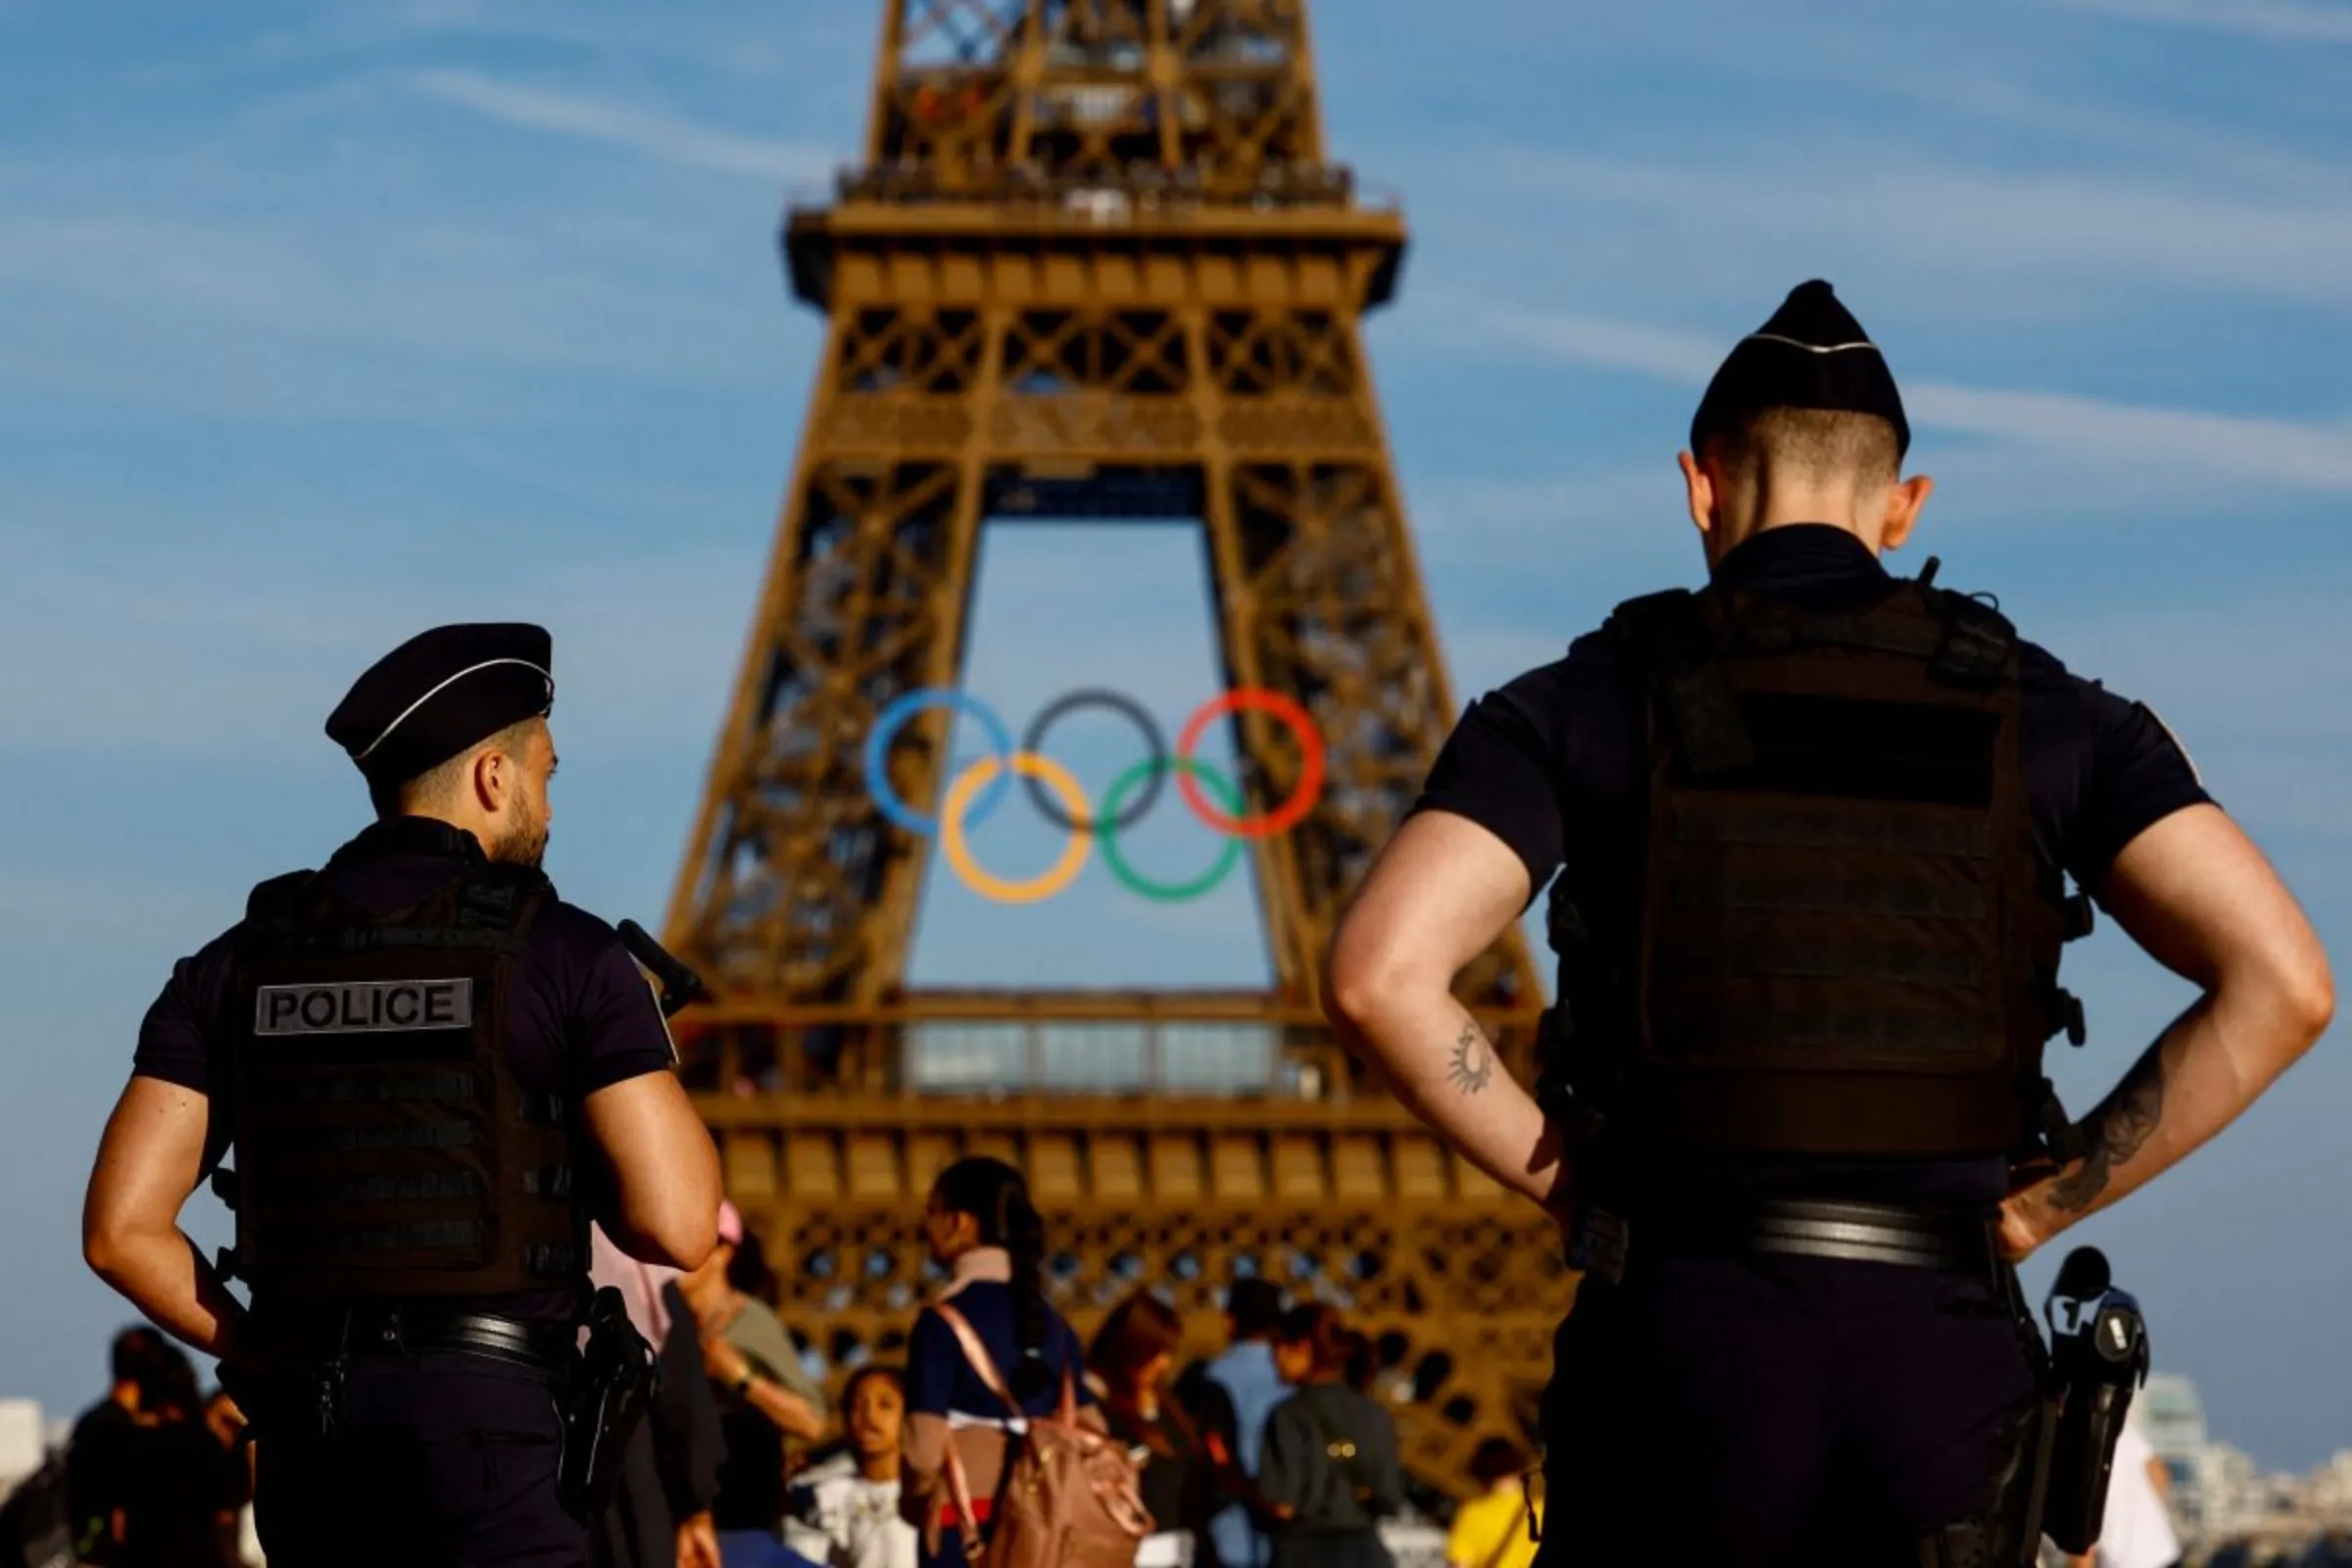 Police officers patrol in front of the Olympic rings displayed on the Eiffel Tower ahead of the Paris 2024 Olympic games in Paris, France, June 7, 2024. REUTERS/Sarah Meyssonnier